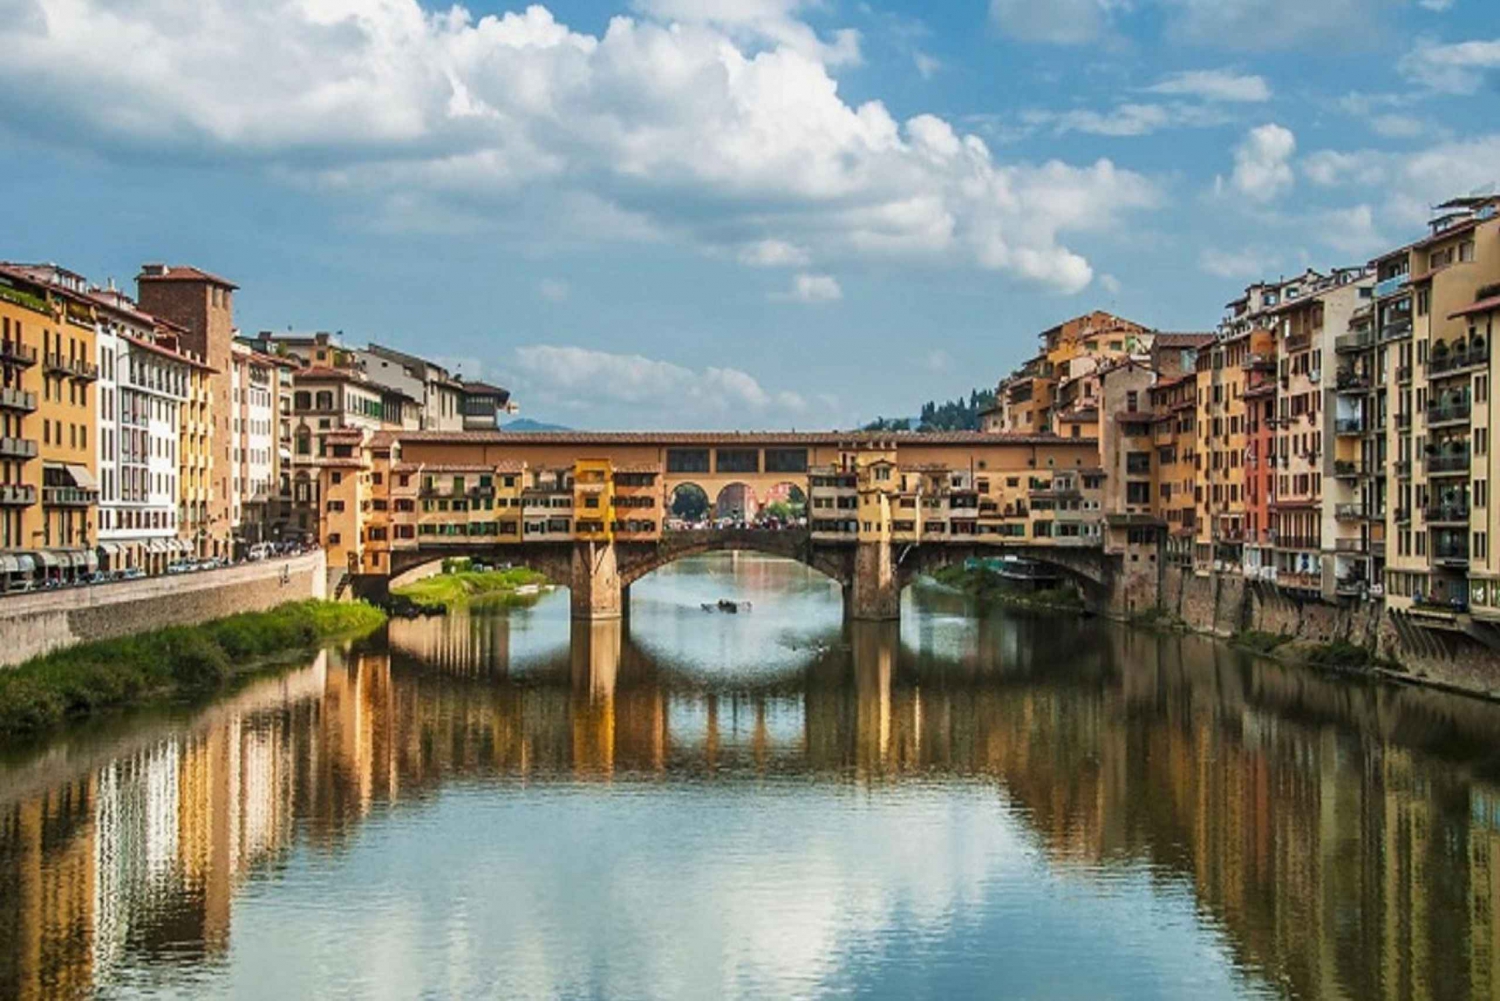 From Rome: A Sweet Walking Tour in Florence